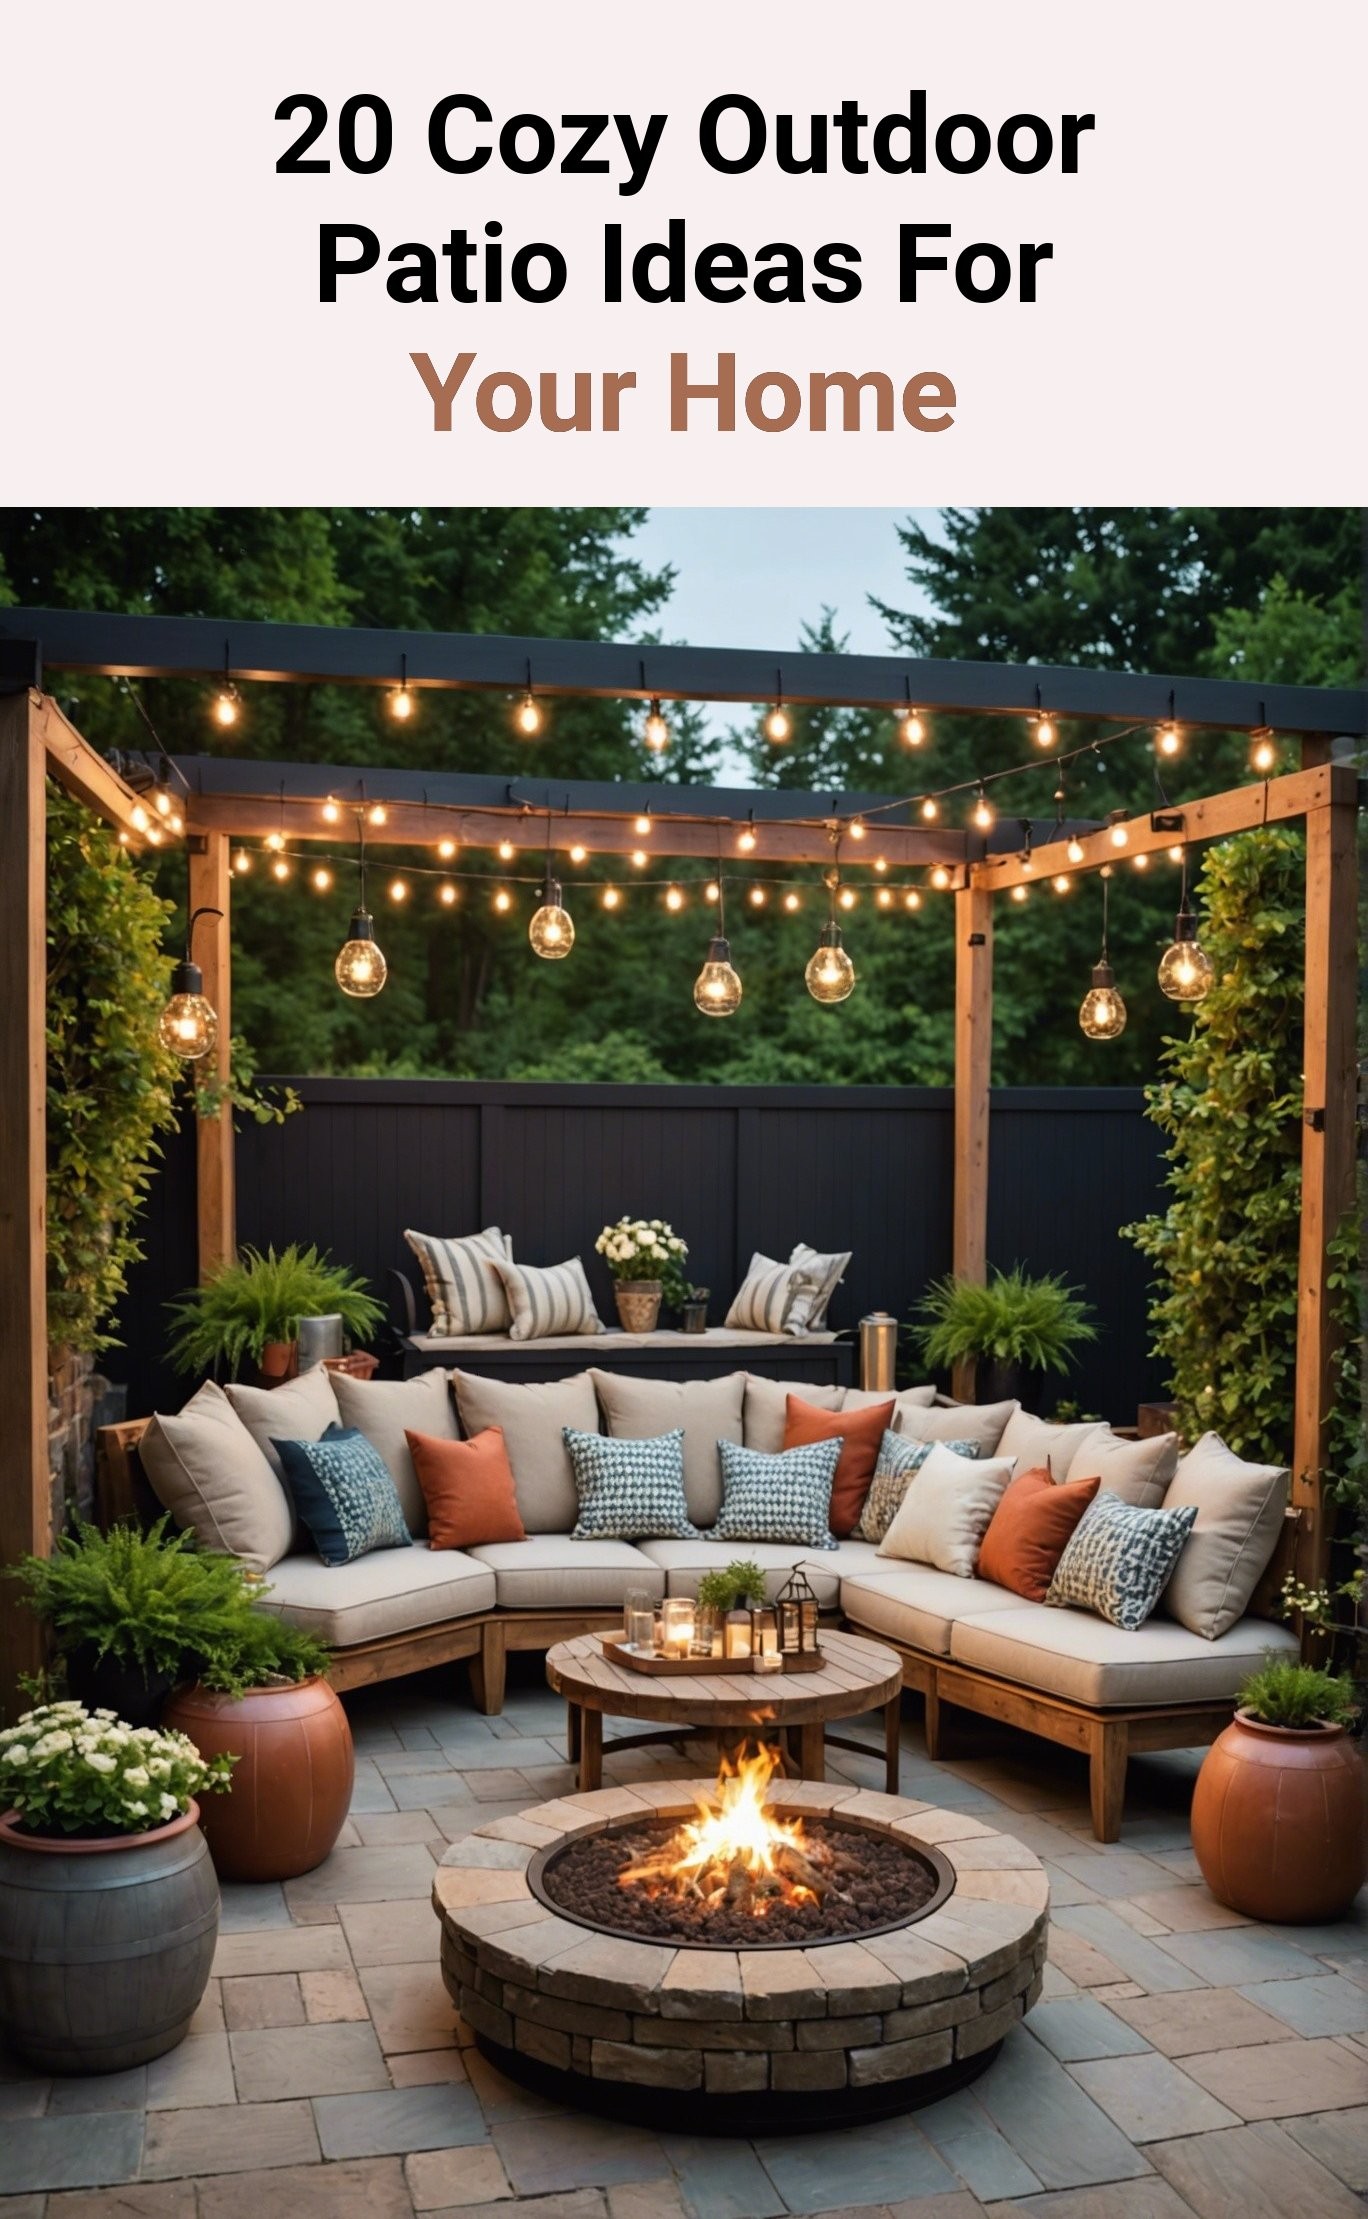 20 Cozy Outdoor Patio Ideas For Your Home